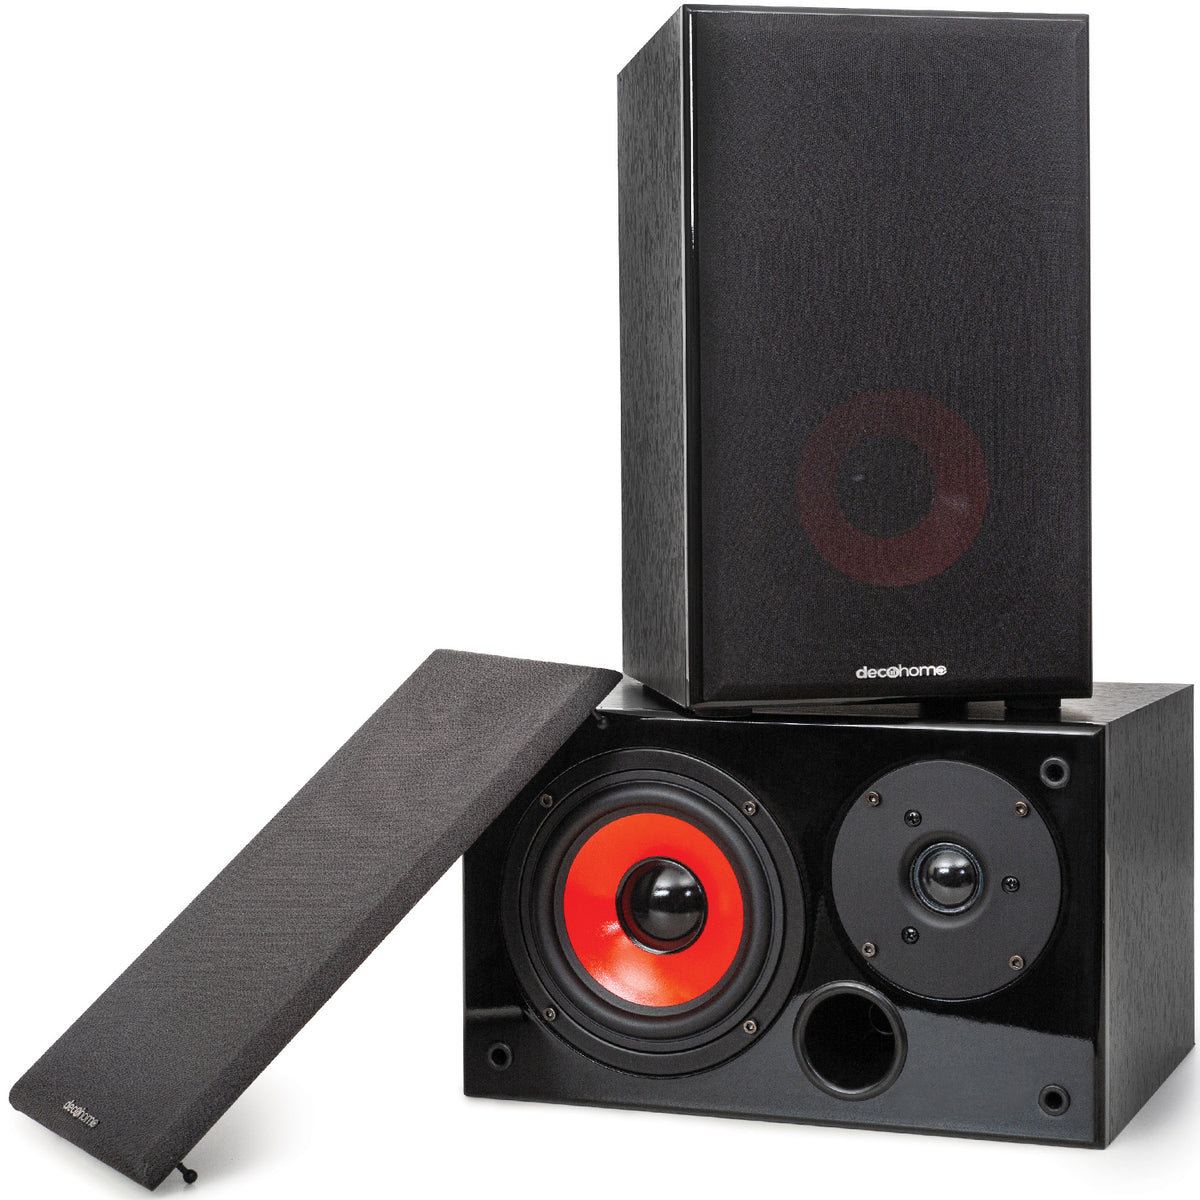 Deco Home DHPAS100 Passive 140W Bookshelf Speaker Set, 5-inch Woofer with Dome Tweeter, Modern Dark Wood Finish with Red Woofer Cone - DecoGear